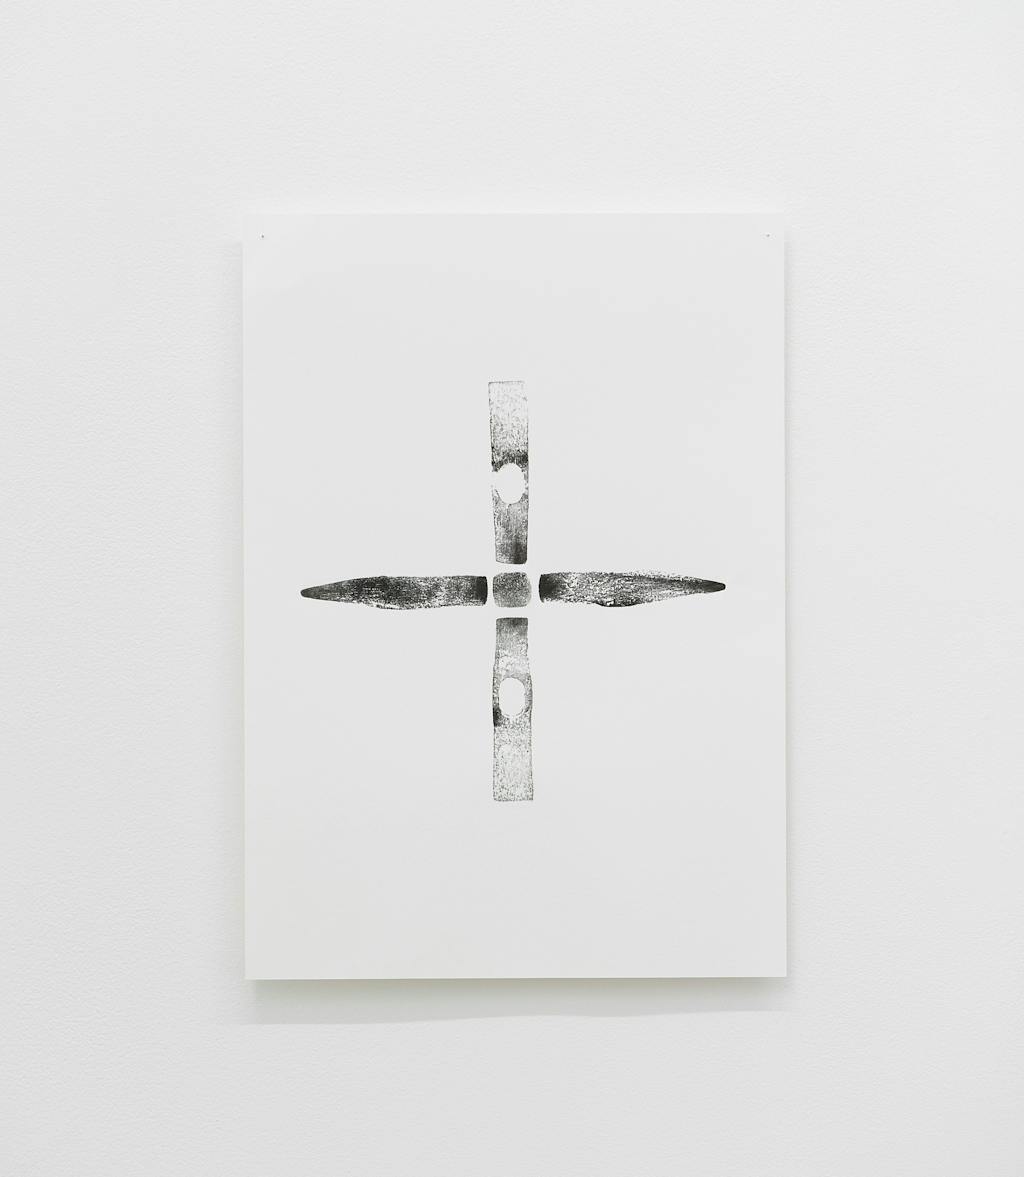 Wind Rose, 2018, print on paper, 42 x 29.7 cm, edition 2/5
/
The 5 sides of the artist’s father’s hammer are printed. The traces and impacts left on the metal throughout the years appear, putting forward the fragile and sensitive side of the object. - © Image courtesy of the artist and Grey Noise, Dubai., Paris Internationale